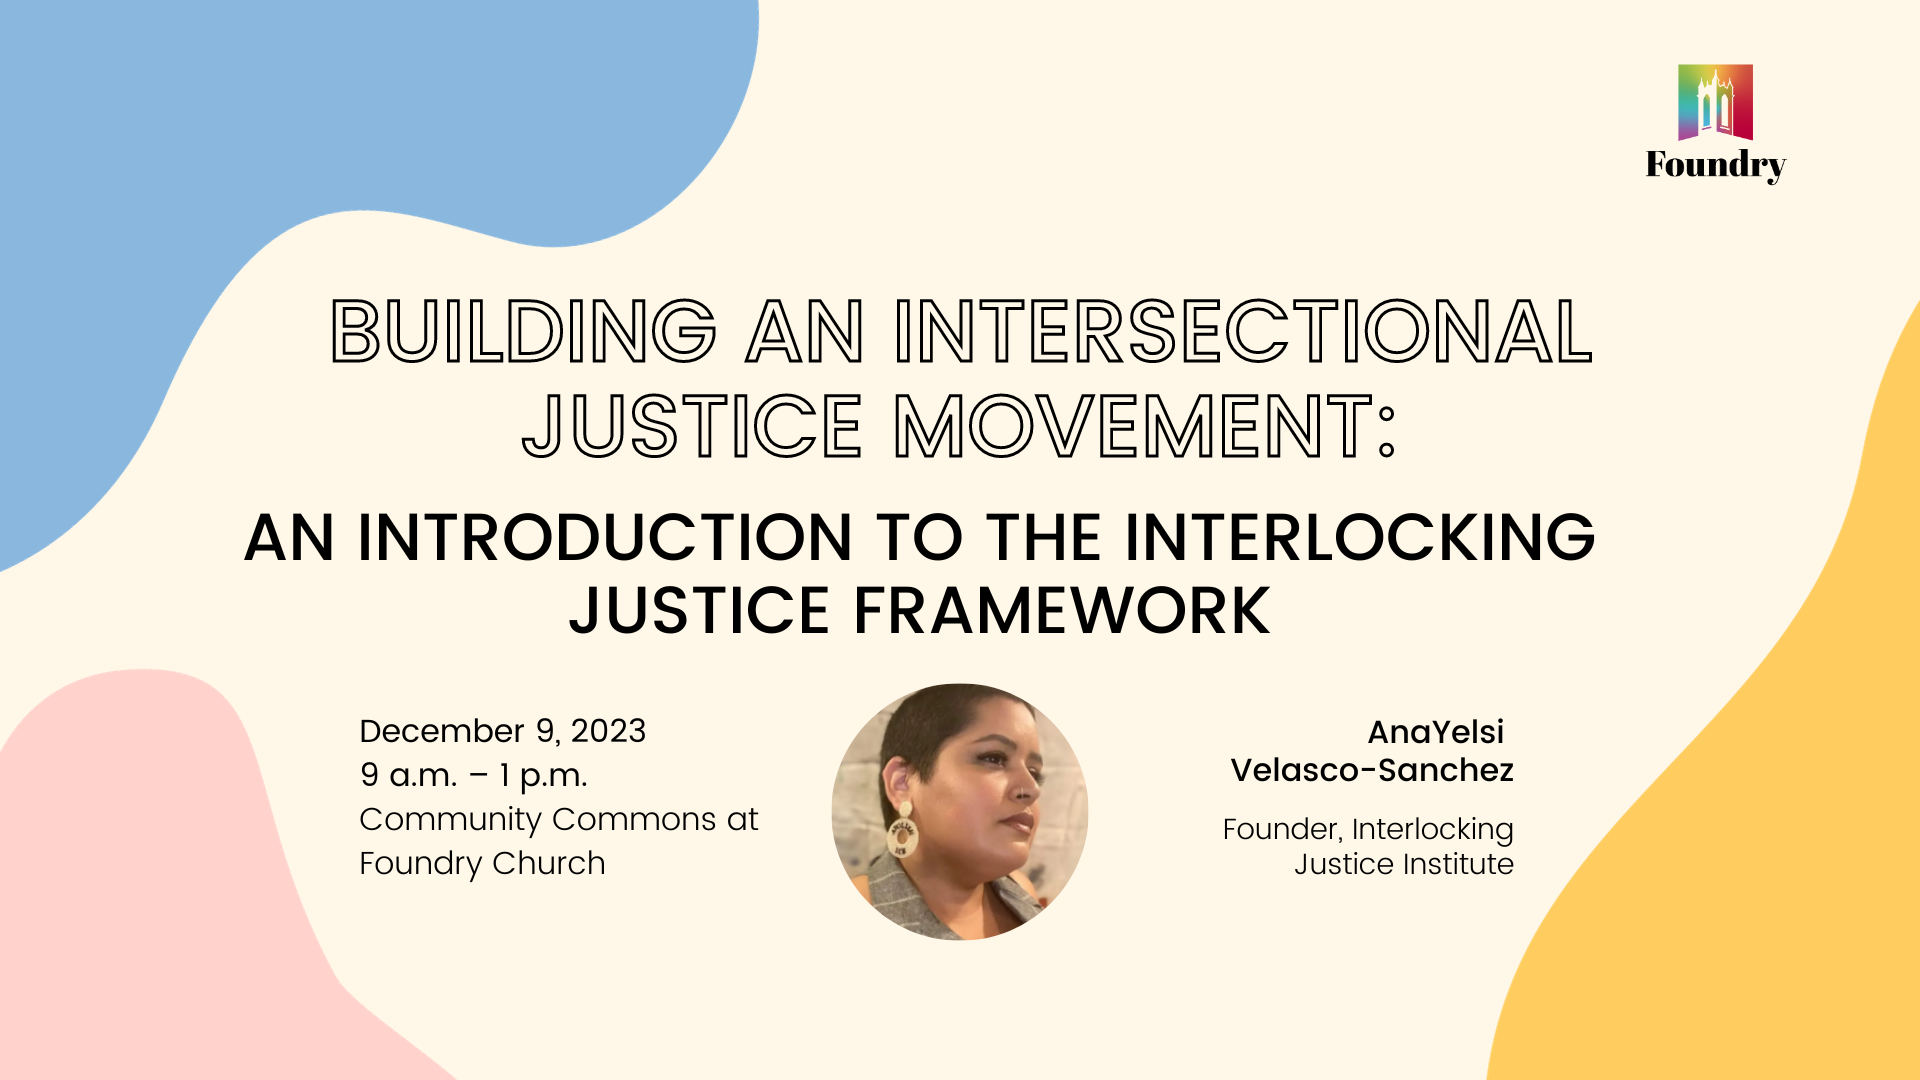 Building an Intersectional Justice Movement: An Introduction to the Interlocking Justice Framework